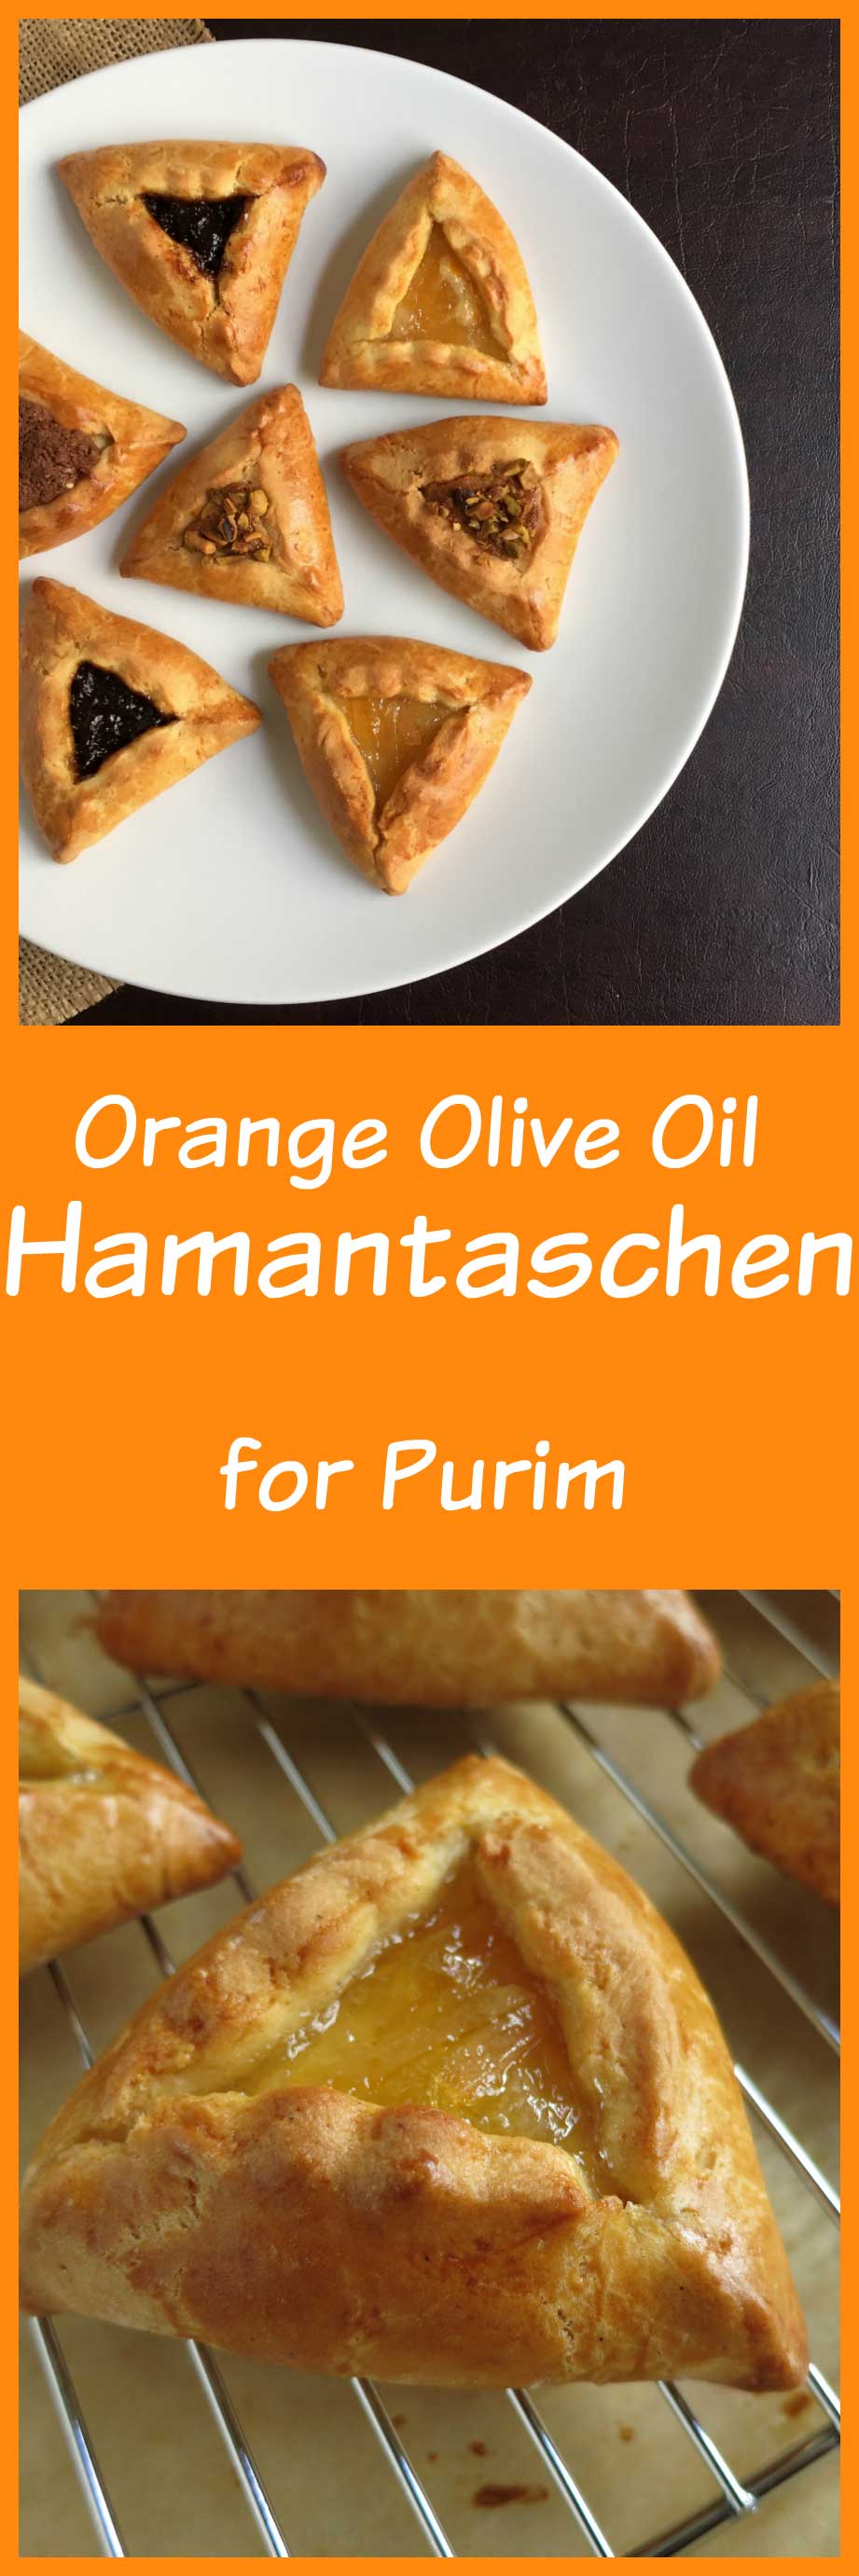 Orange Olive Oil Hamantaschen Dough makes the perfect base for any filling you desire in this traditional Purim cookie